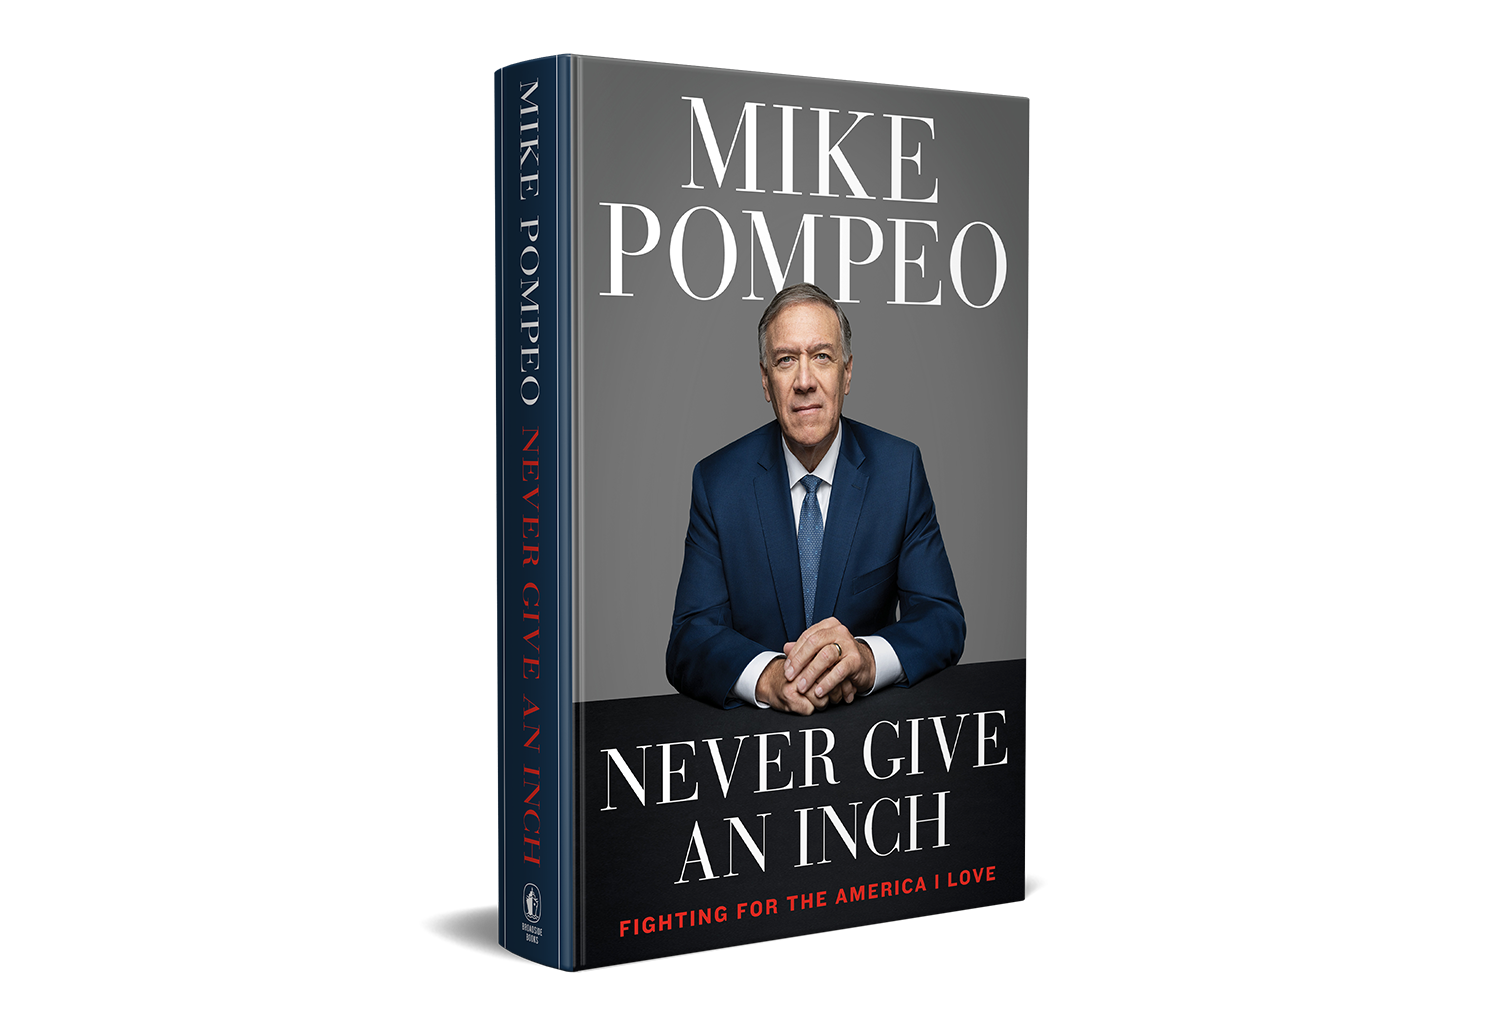 Receive Never Give an Inch: Fighting for the America I Love by Mike Pompeo from TBN